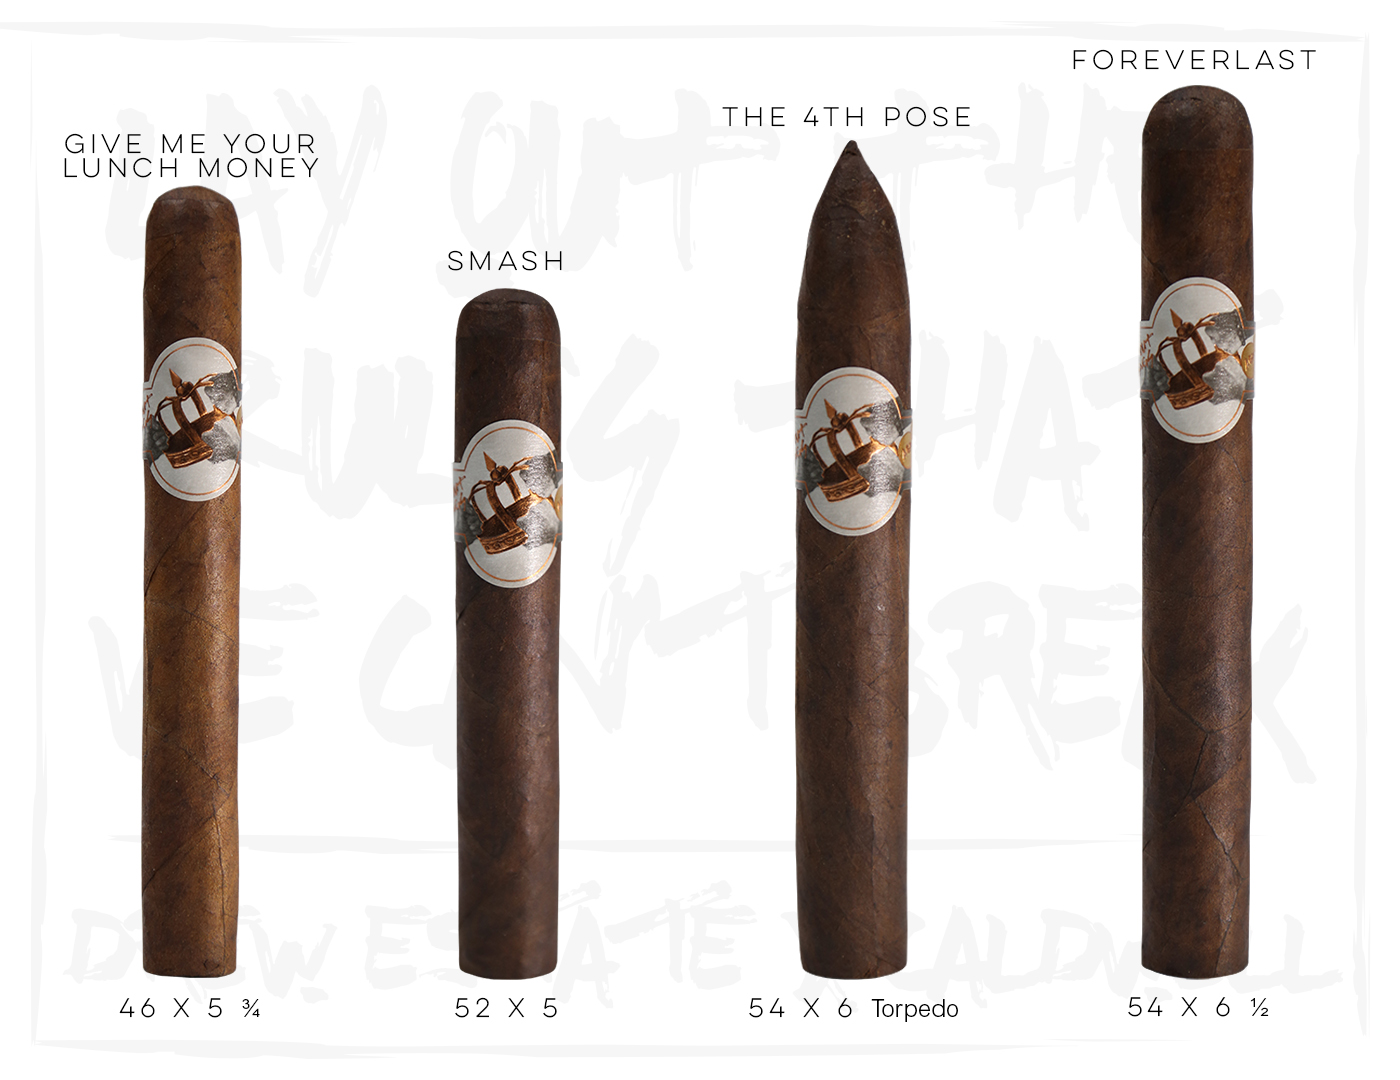 Caldwell All Out Kings cigar sizes